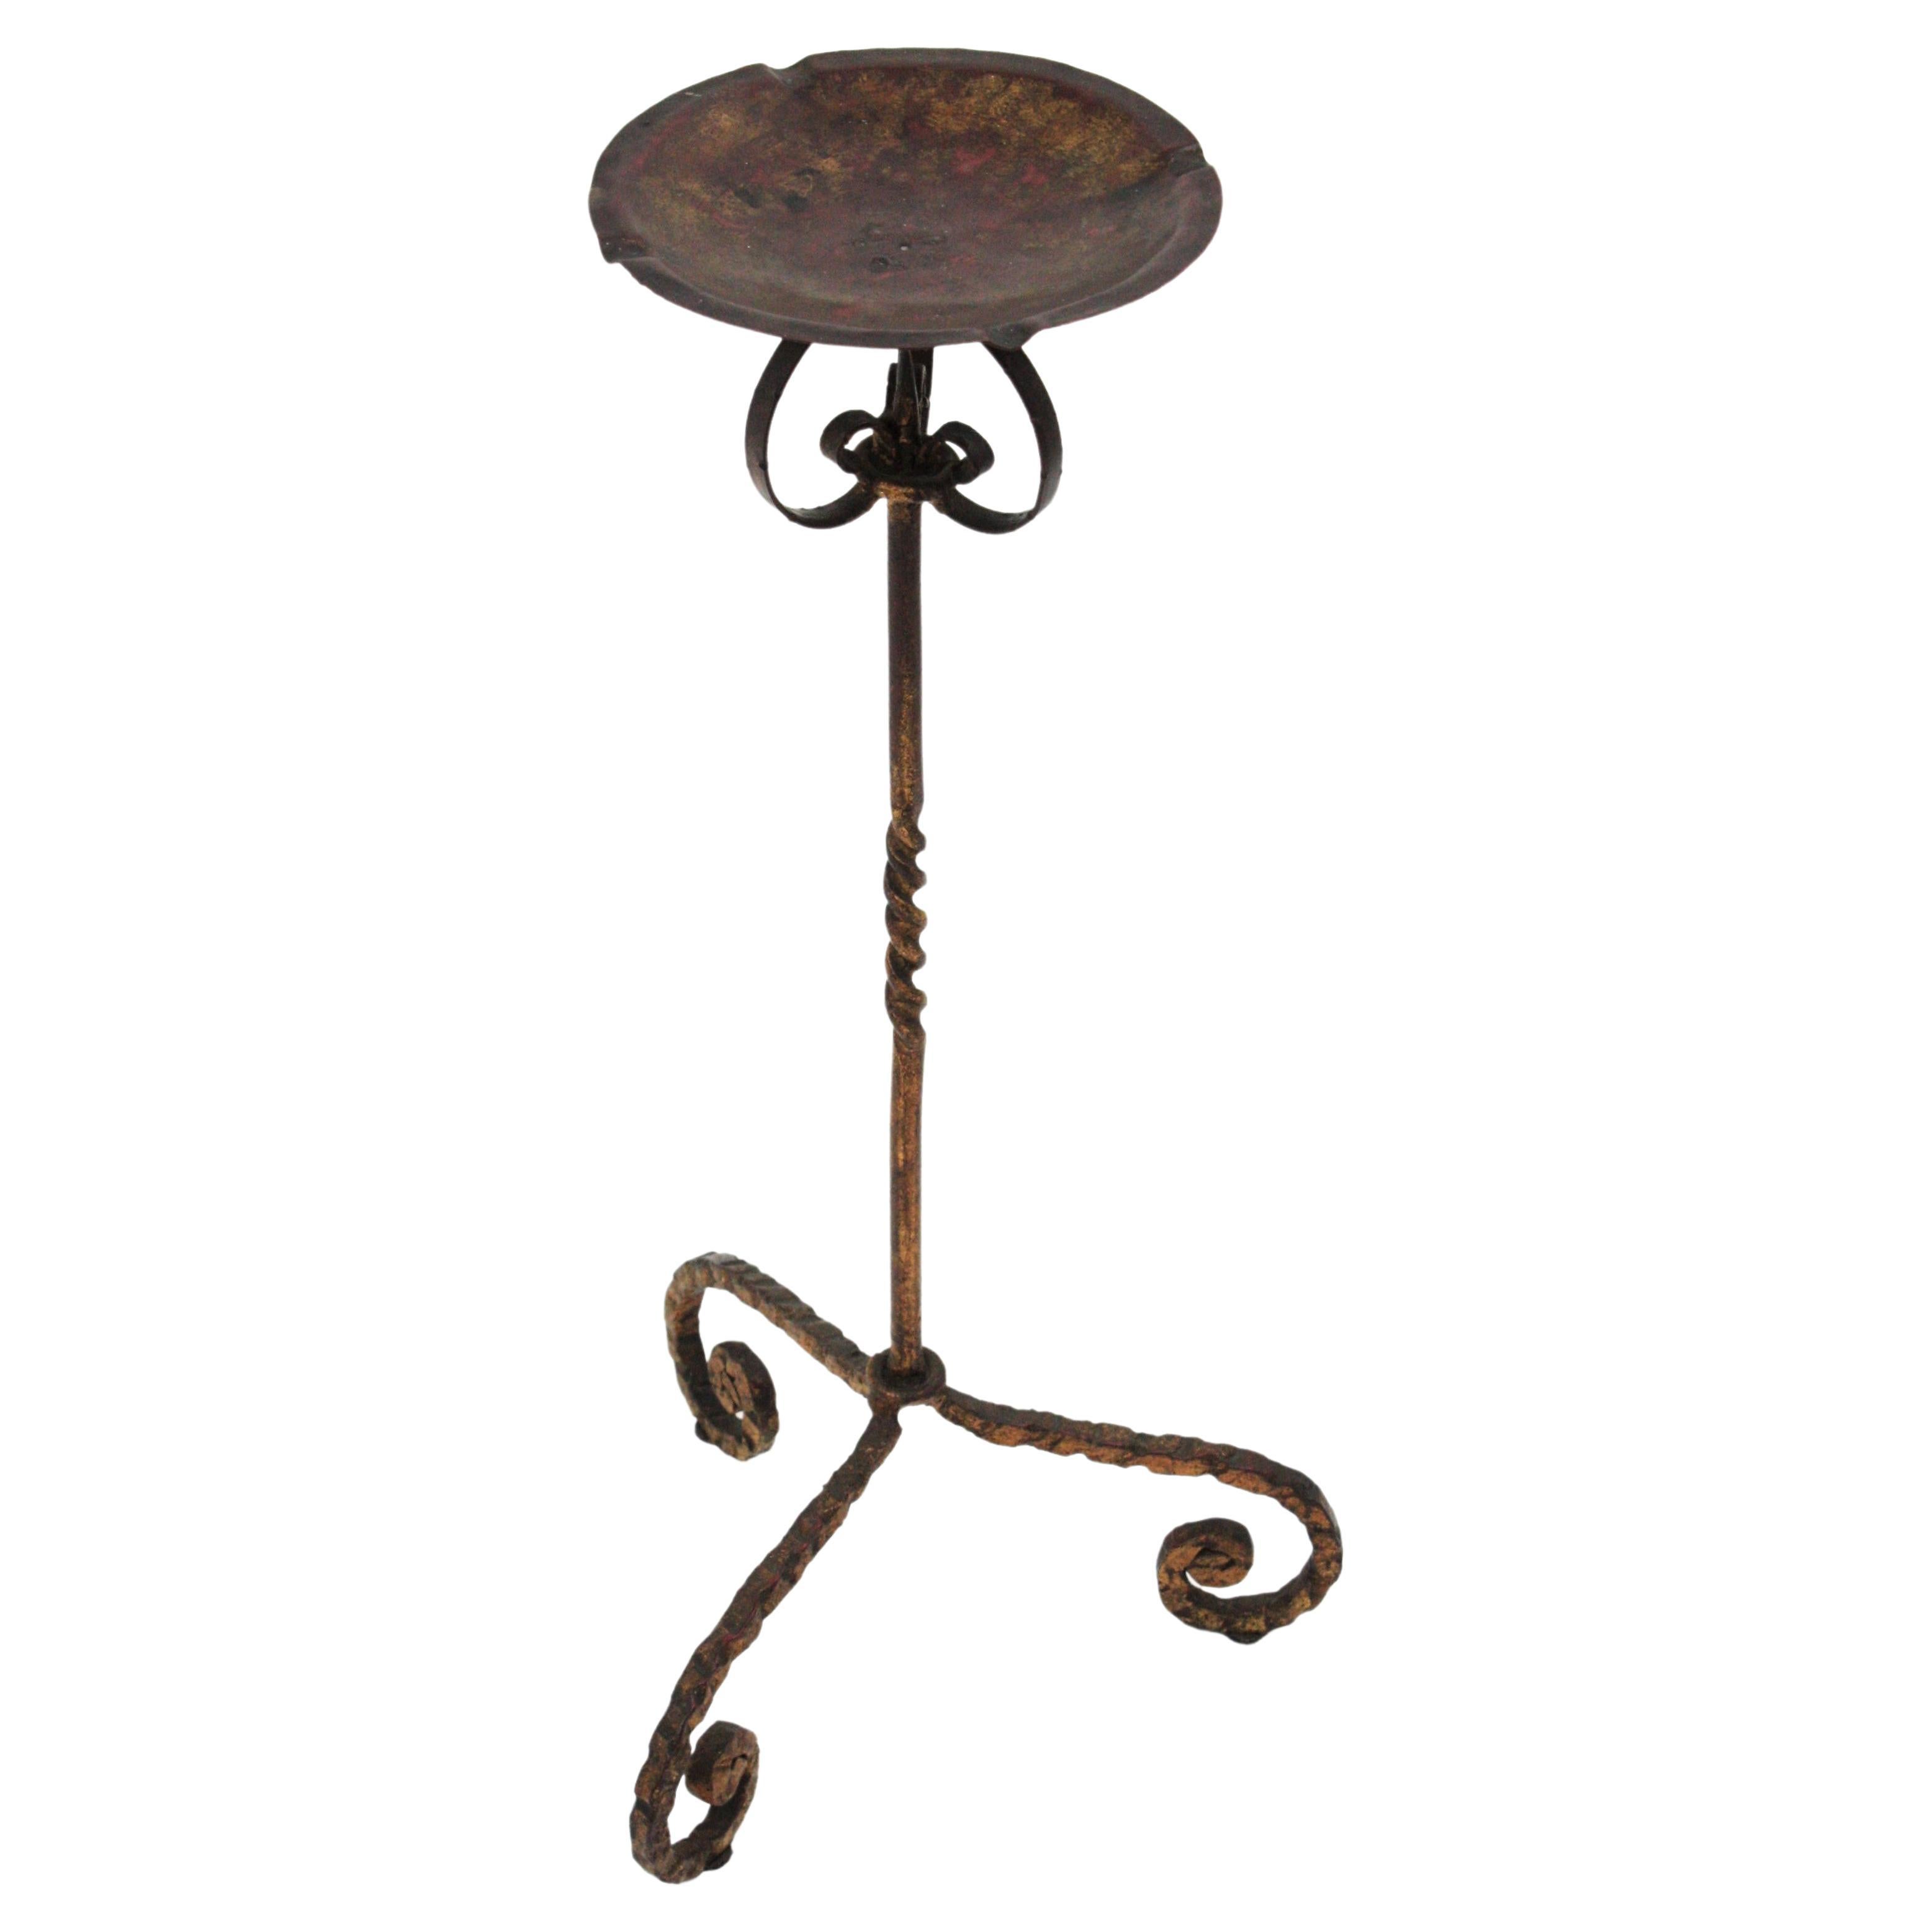 Spanish Drinks Table / Side Table / Floor Ashtray, Wrought Iron, 1940s For Sale